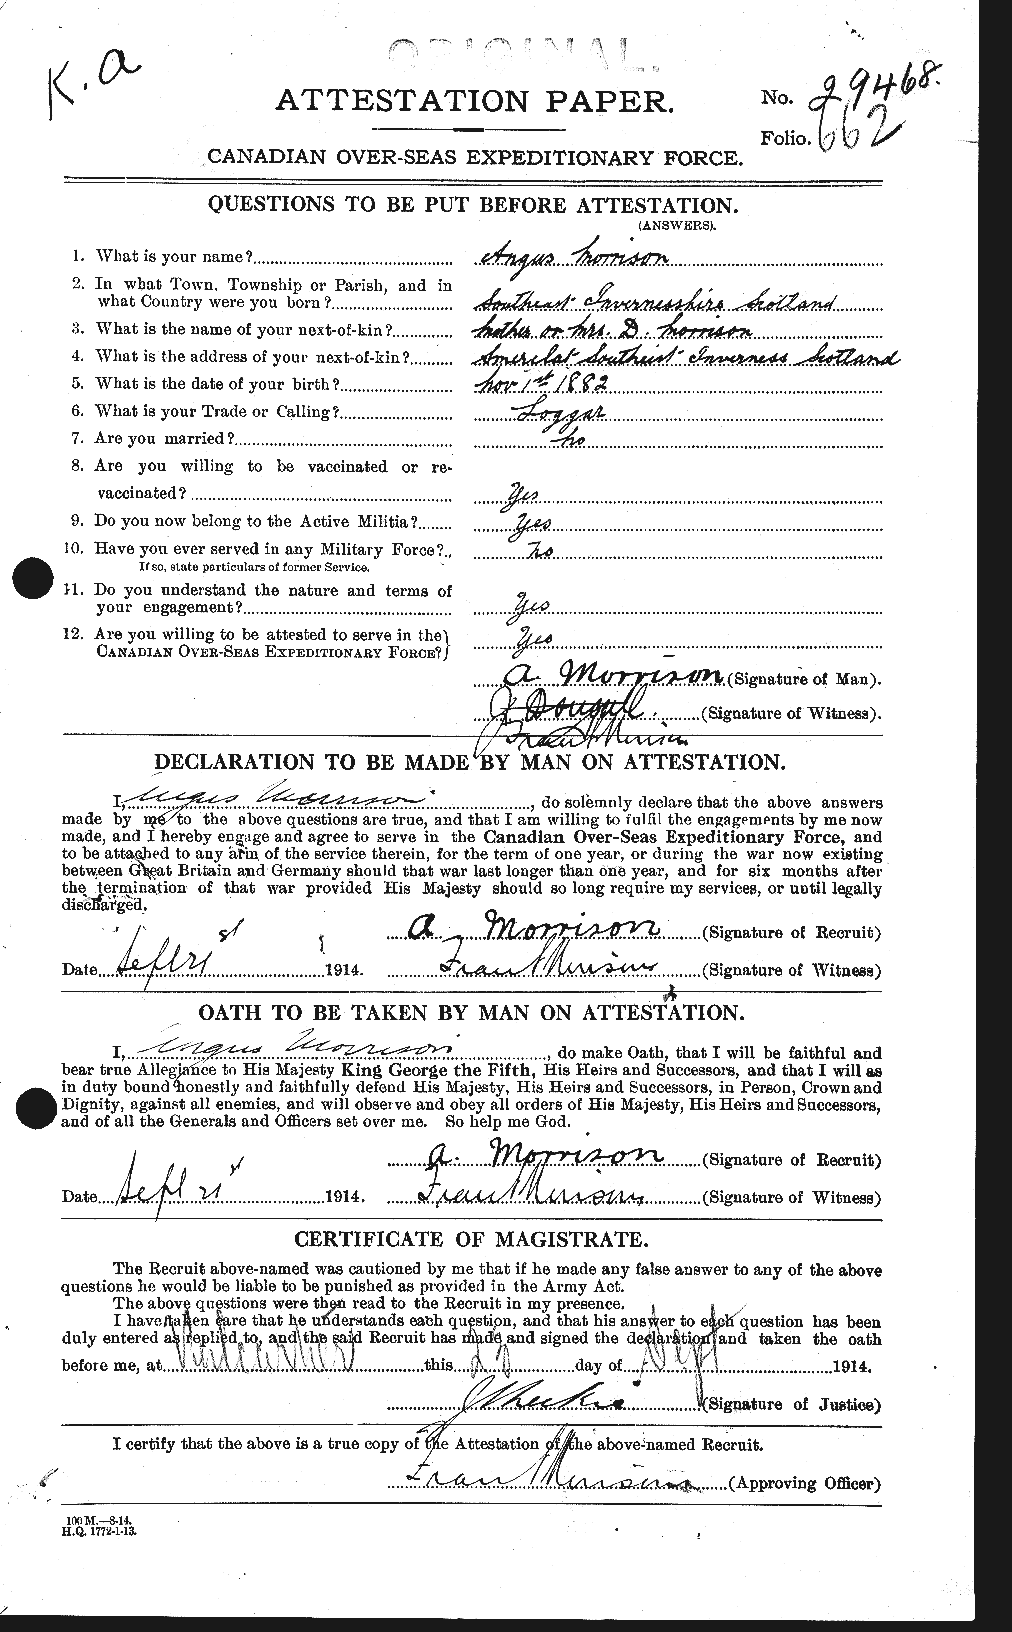 Personnel Records of the First World War - CEF 511037a